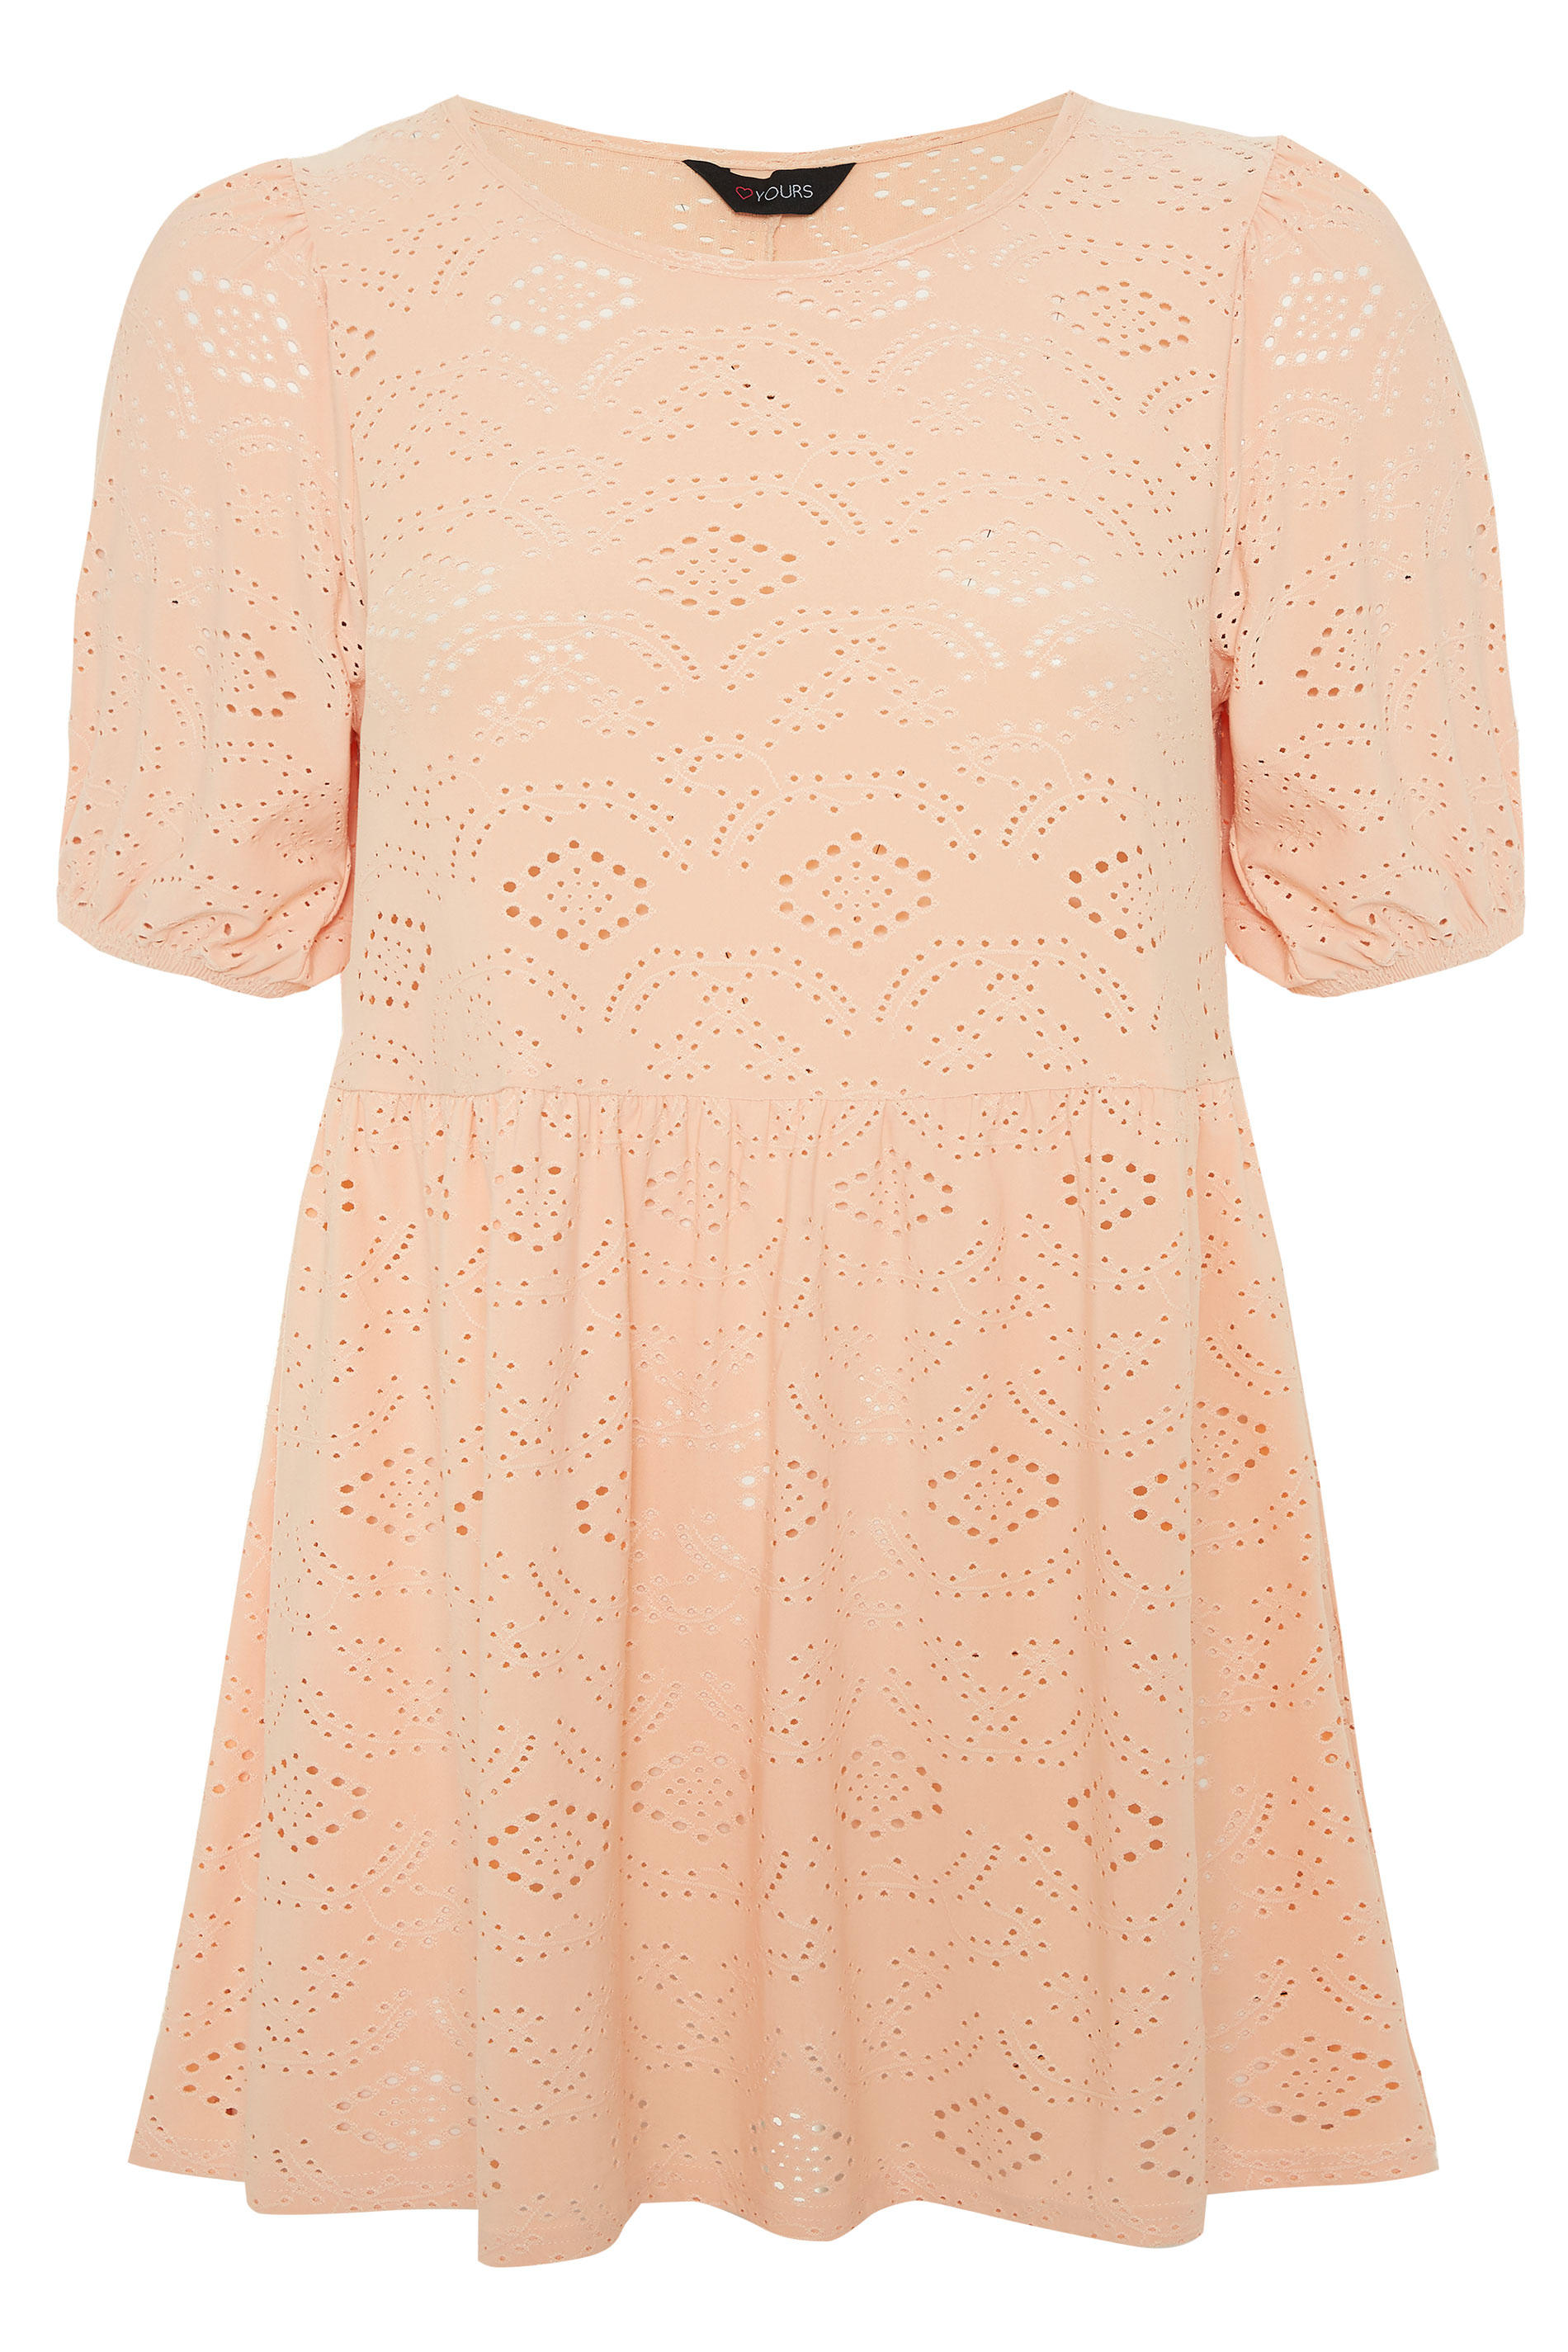 Blush Pink Broderie Anglaise Puff Sleeve Smock Top | Yours Clothing